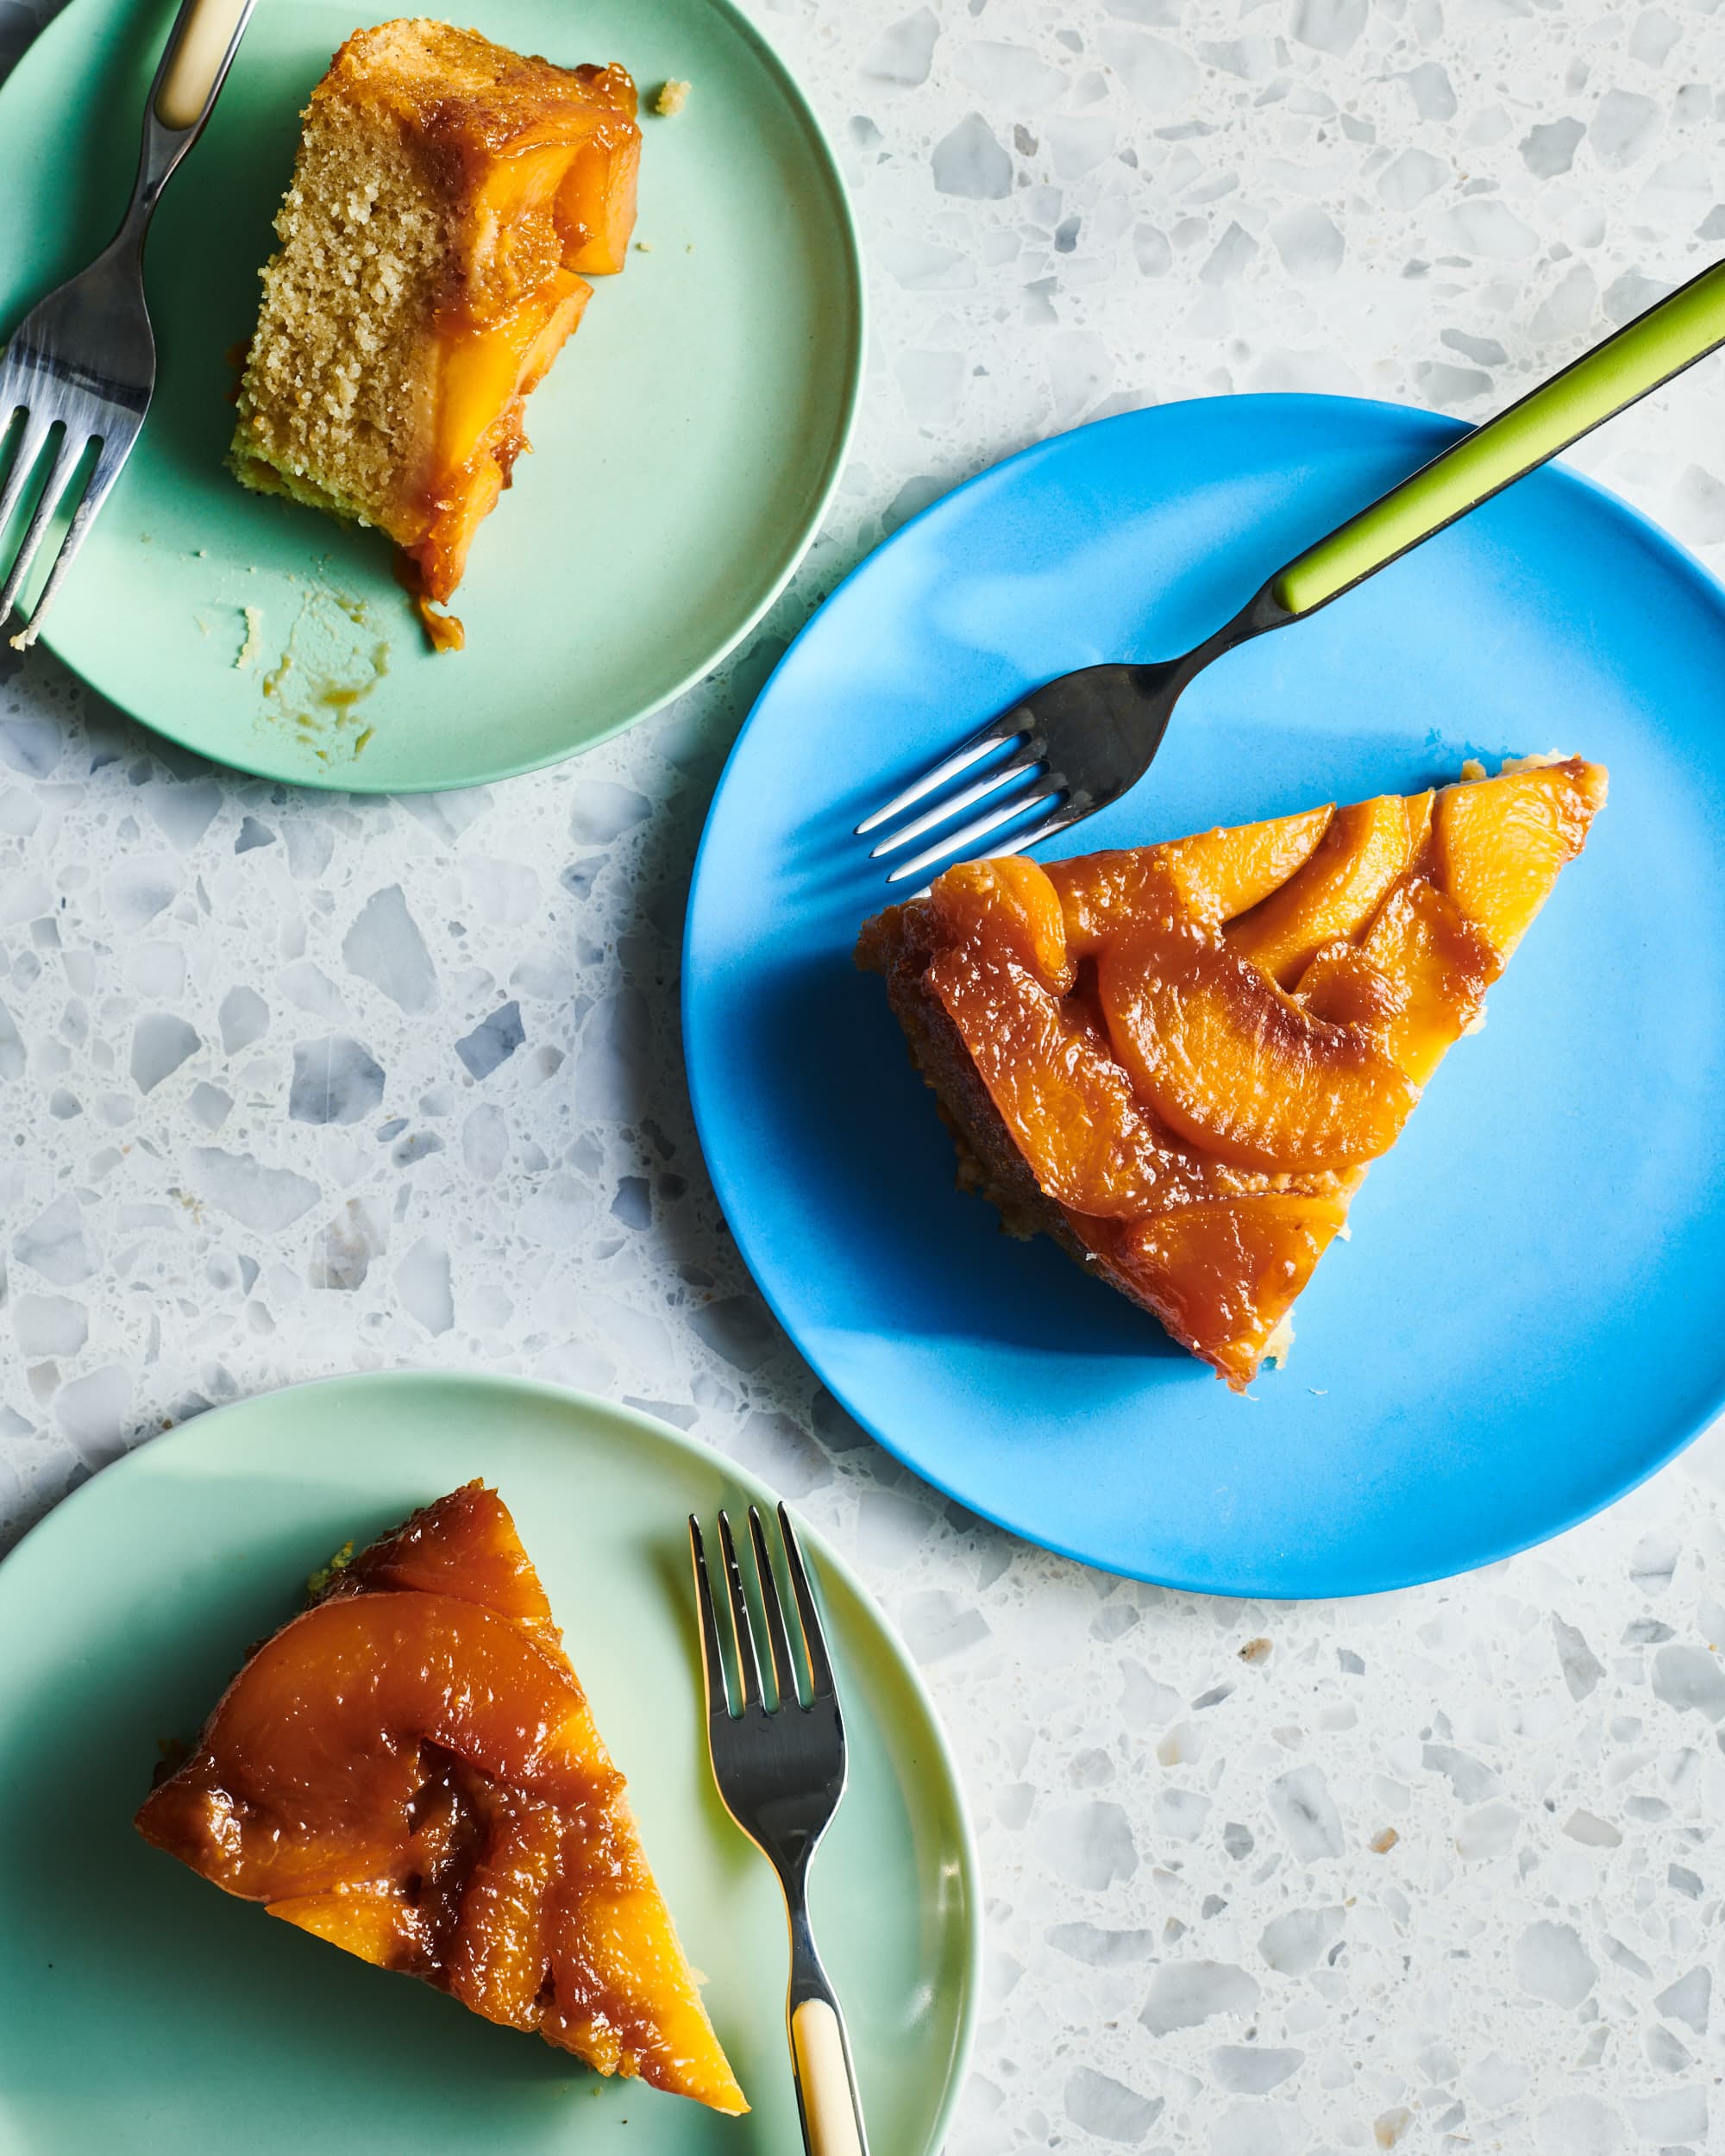 Summer Peach Upside Down Cake in Partnership with KitchenAid